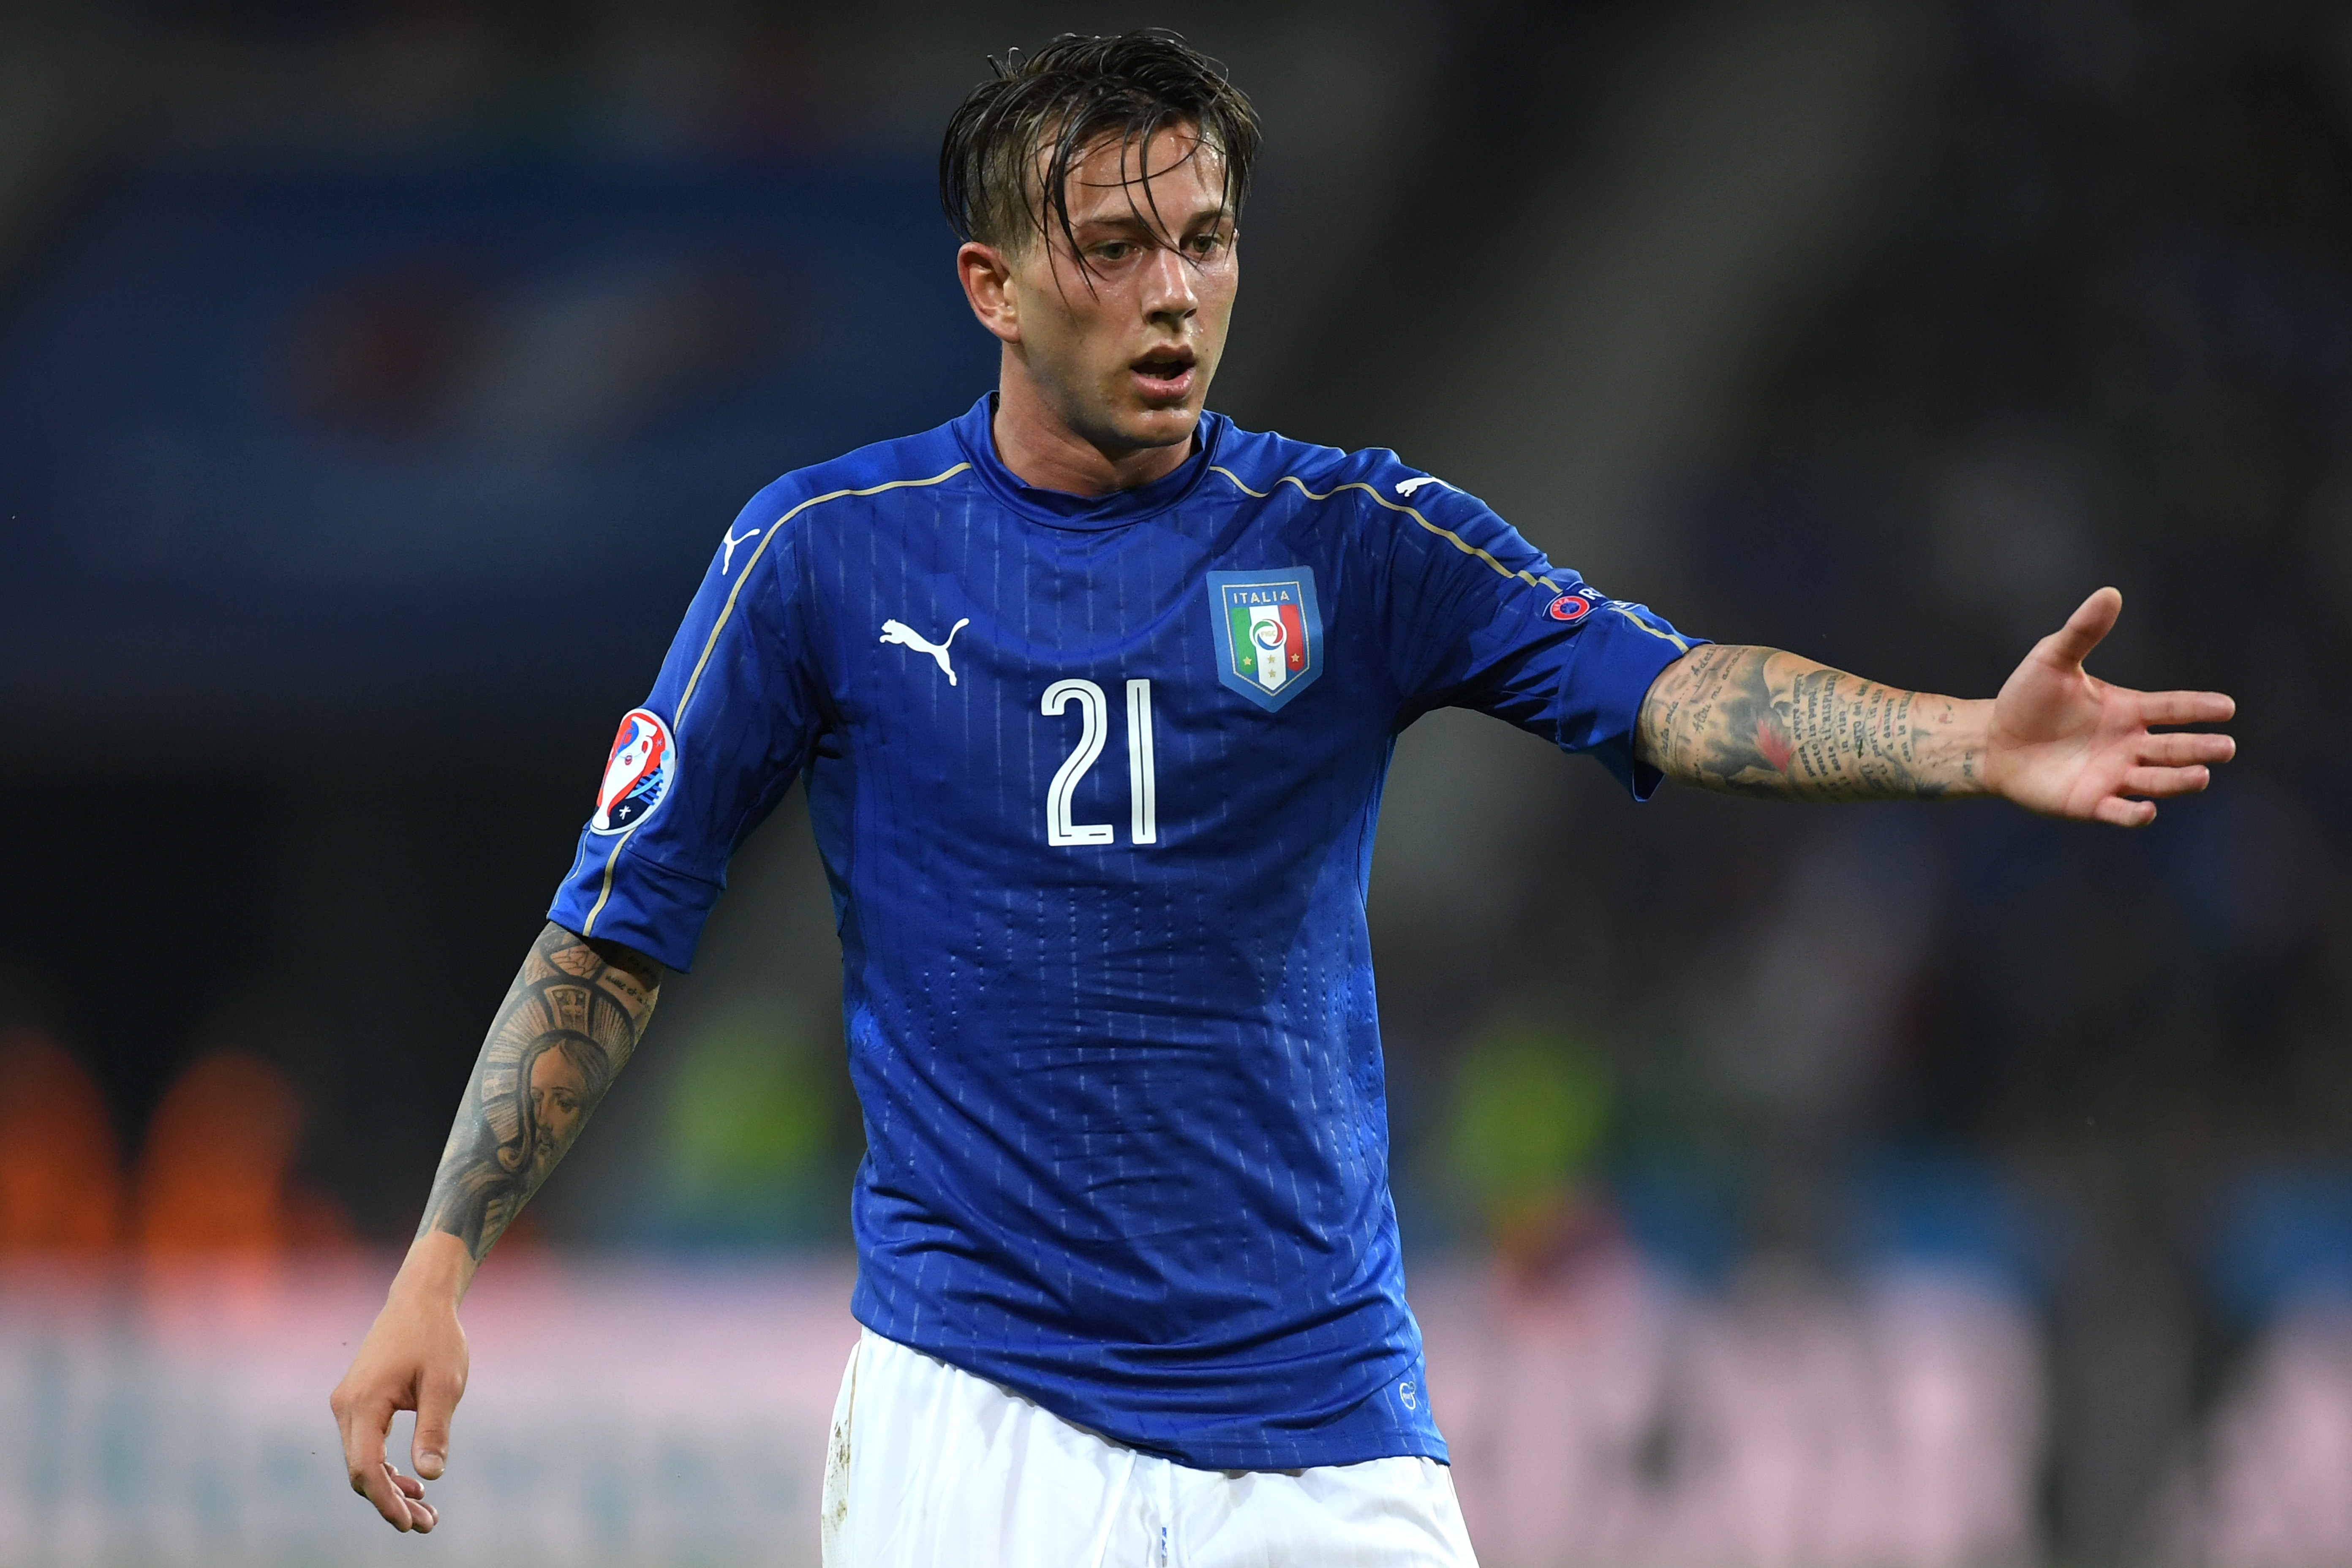 LILLE, FRANCE - JUNE 22:  Federico Bernardeschi of Italy gestures qduring the UEFA EURO 2016 Group E match between Italy and Republic of Ireland at Stade Pierre-Mauroy on June 22, 2016 in Lille, France.  (Photo by Matthias Hangst/Getty Images)